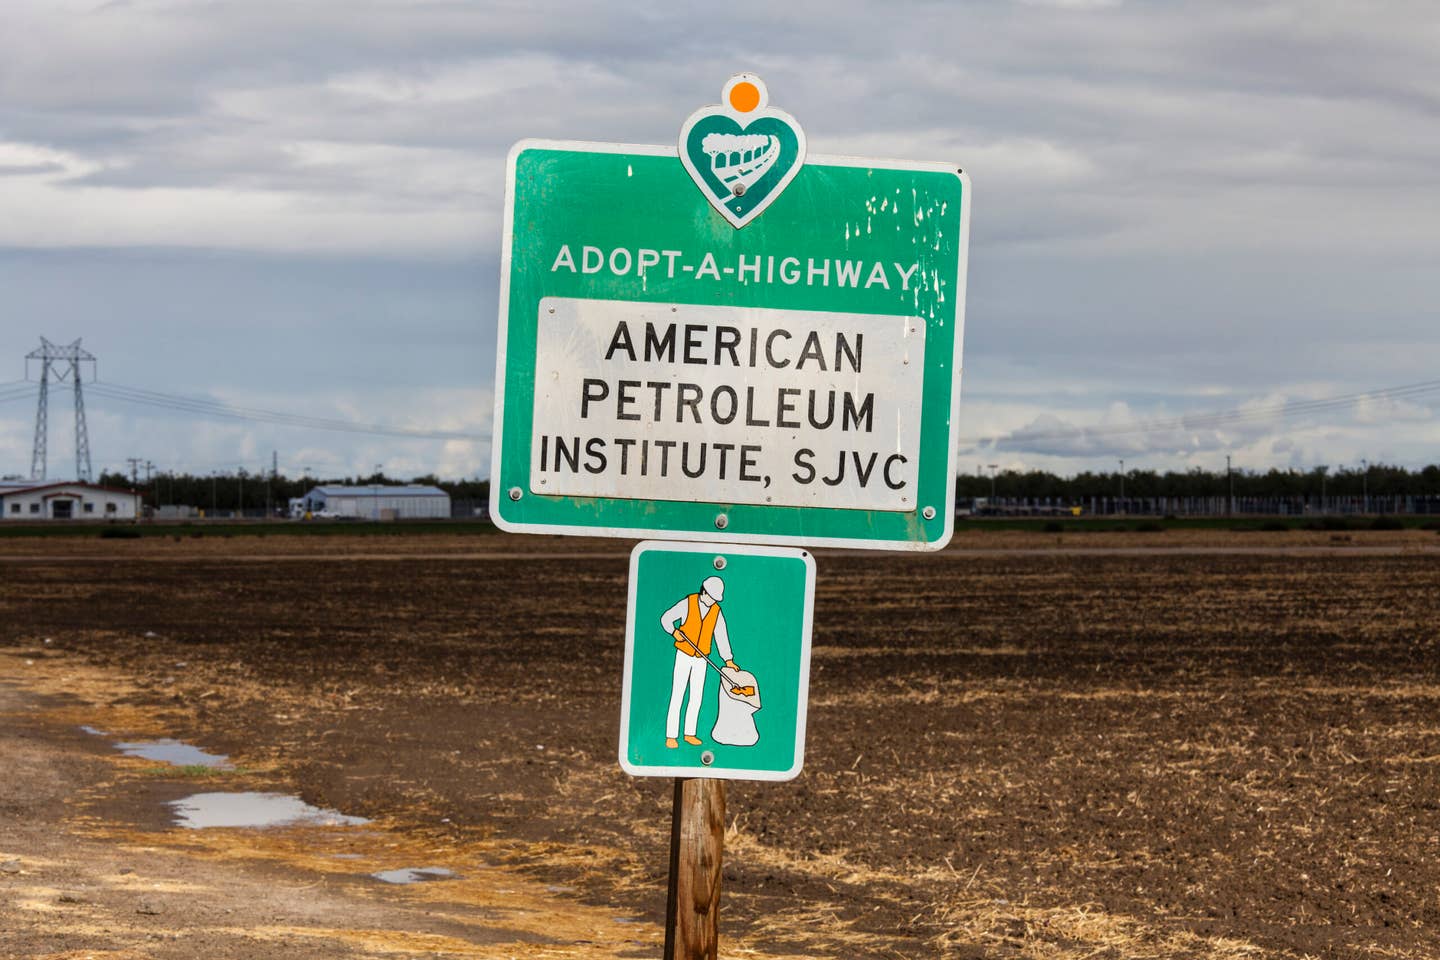 American Petroleum Institute Adopt a Highway sign near Shafter. San Joaquin Valley, California. <em>Getty Images</em>